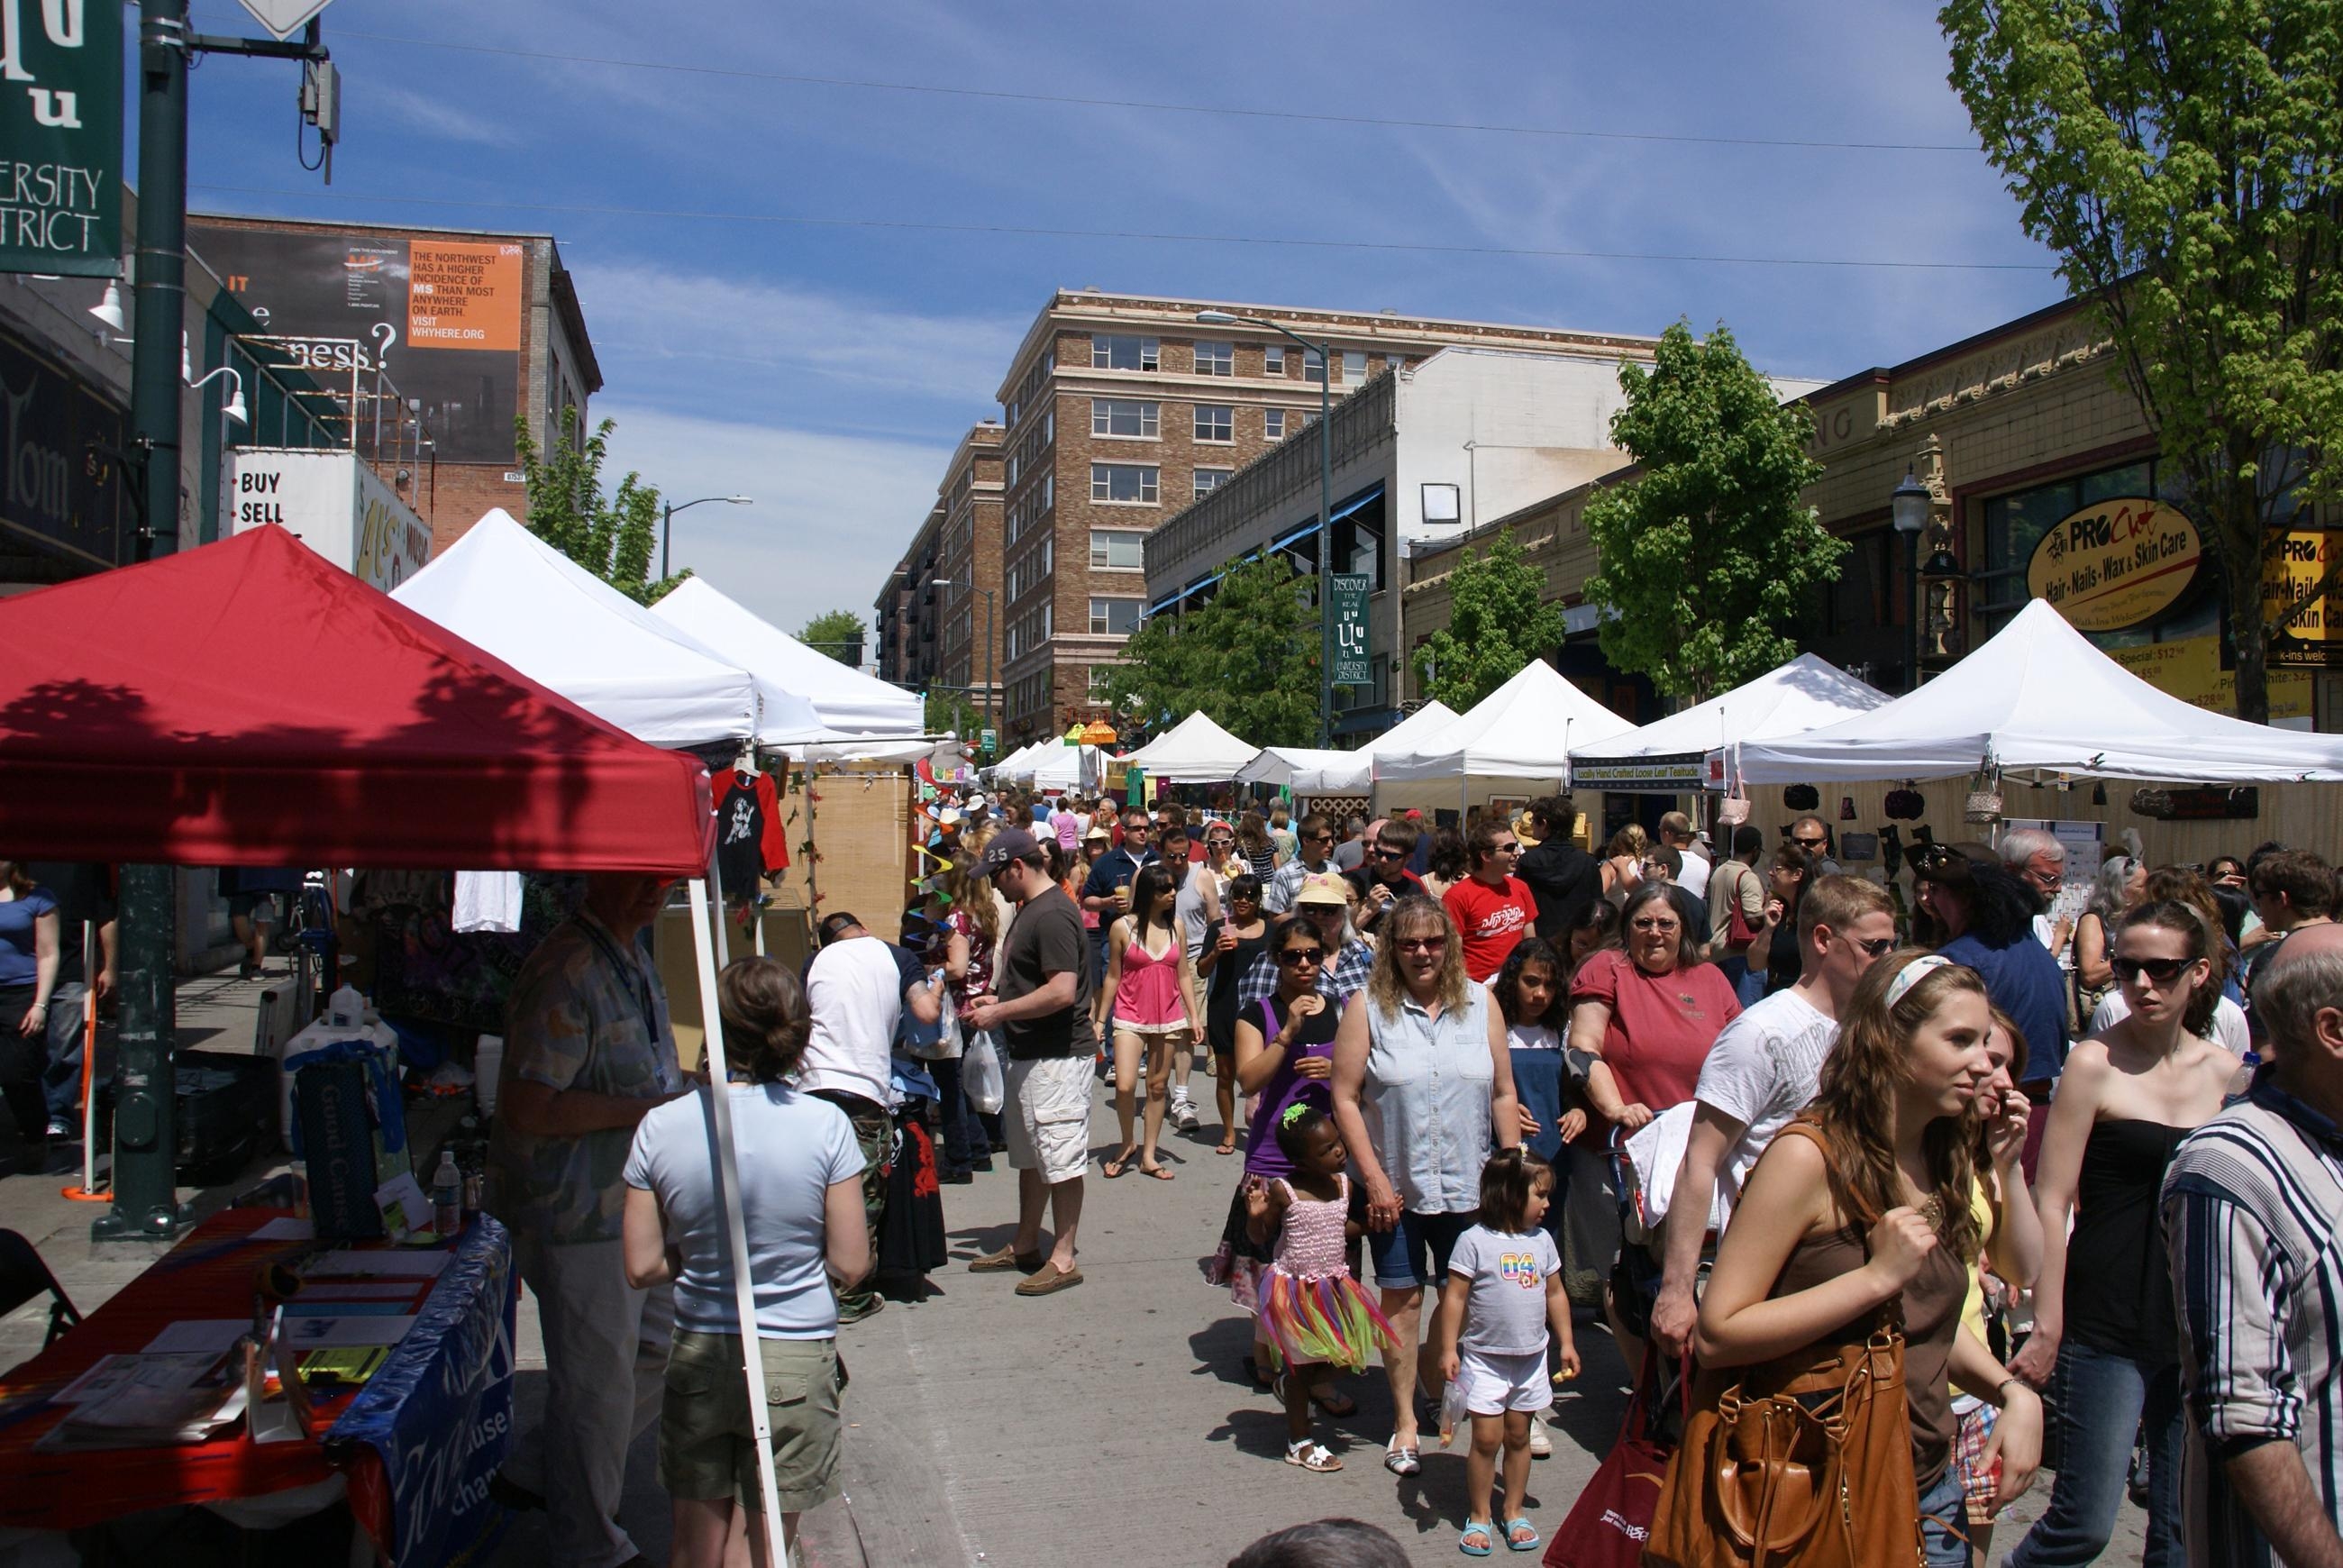 Colorado Artisan Markets is an event series for handmade artists, crafter and food vendors to sell their product in a well-advertised and organized outdoor show!